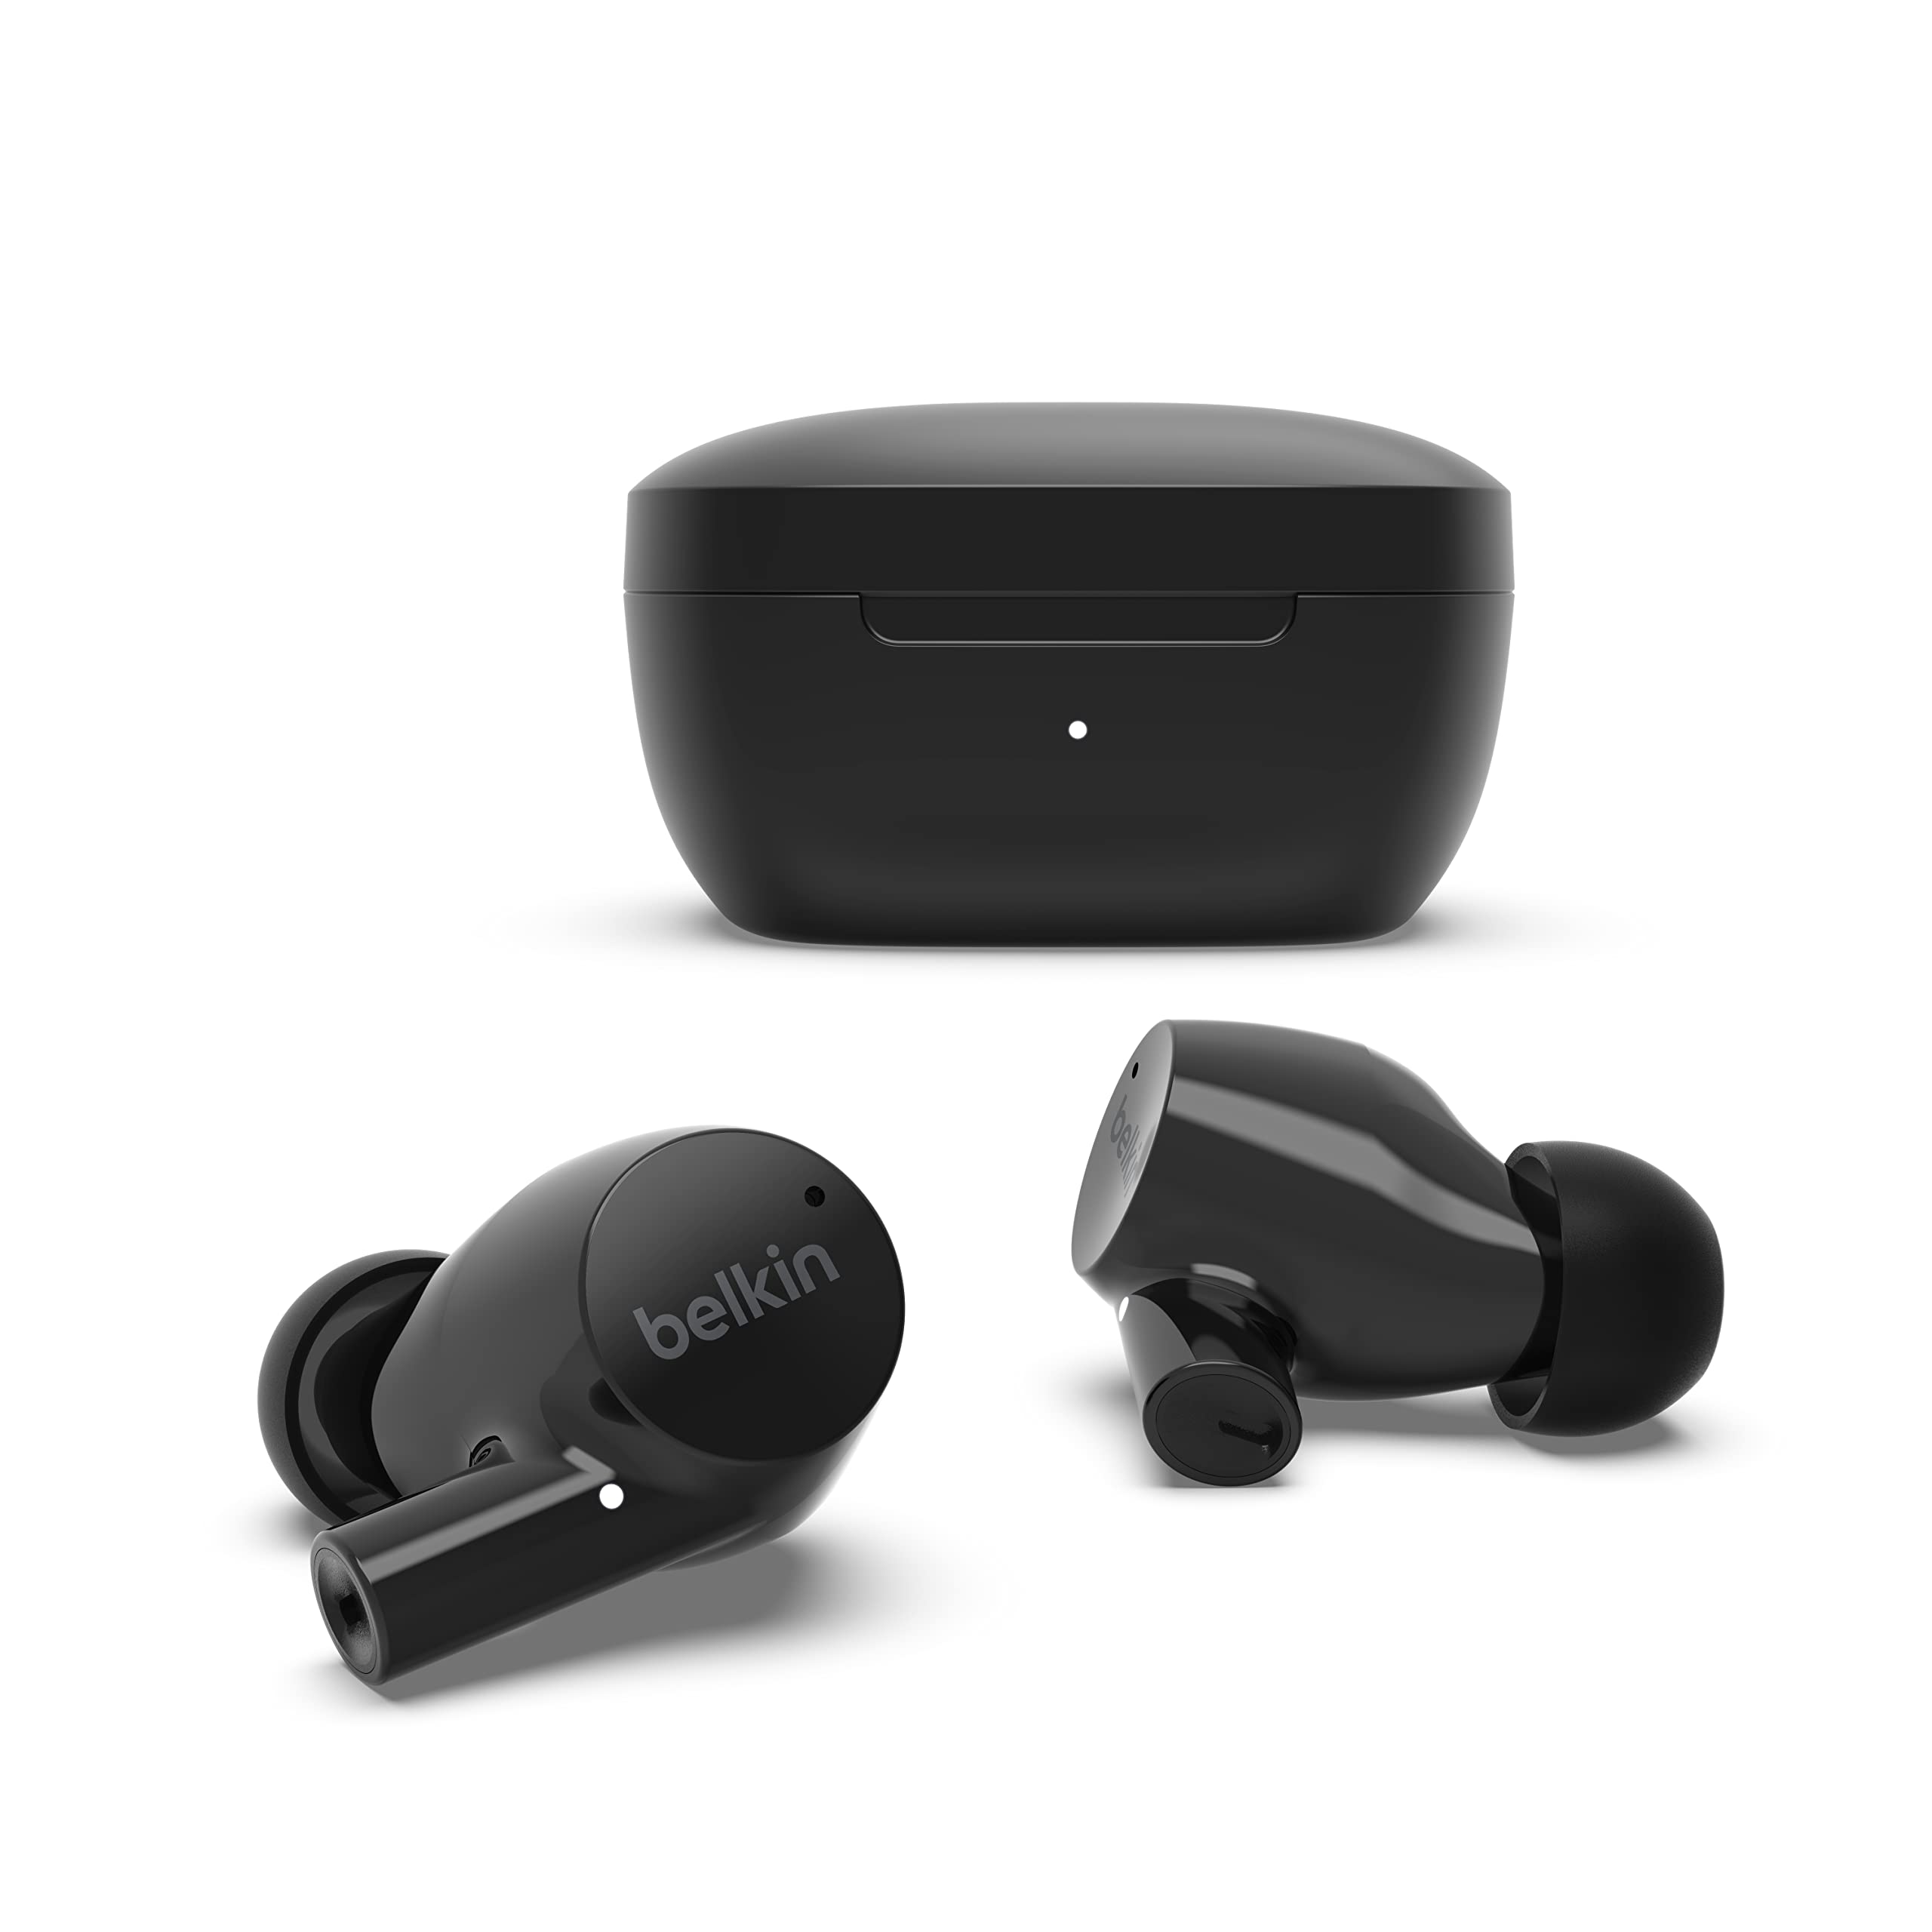 Belkin SoundForm Rise True Wireless Ear Buds with Wireless Charger Case, Dual Microphone, IPX5 Water Resistant Earbuds, Bluetooth Headphones, Compatible with iPhone, Galaxy, and More - Black